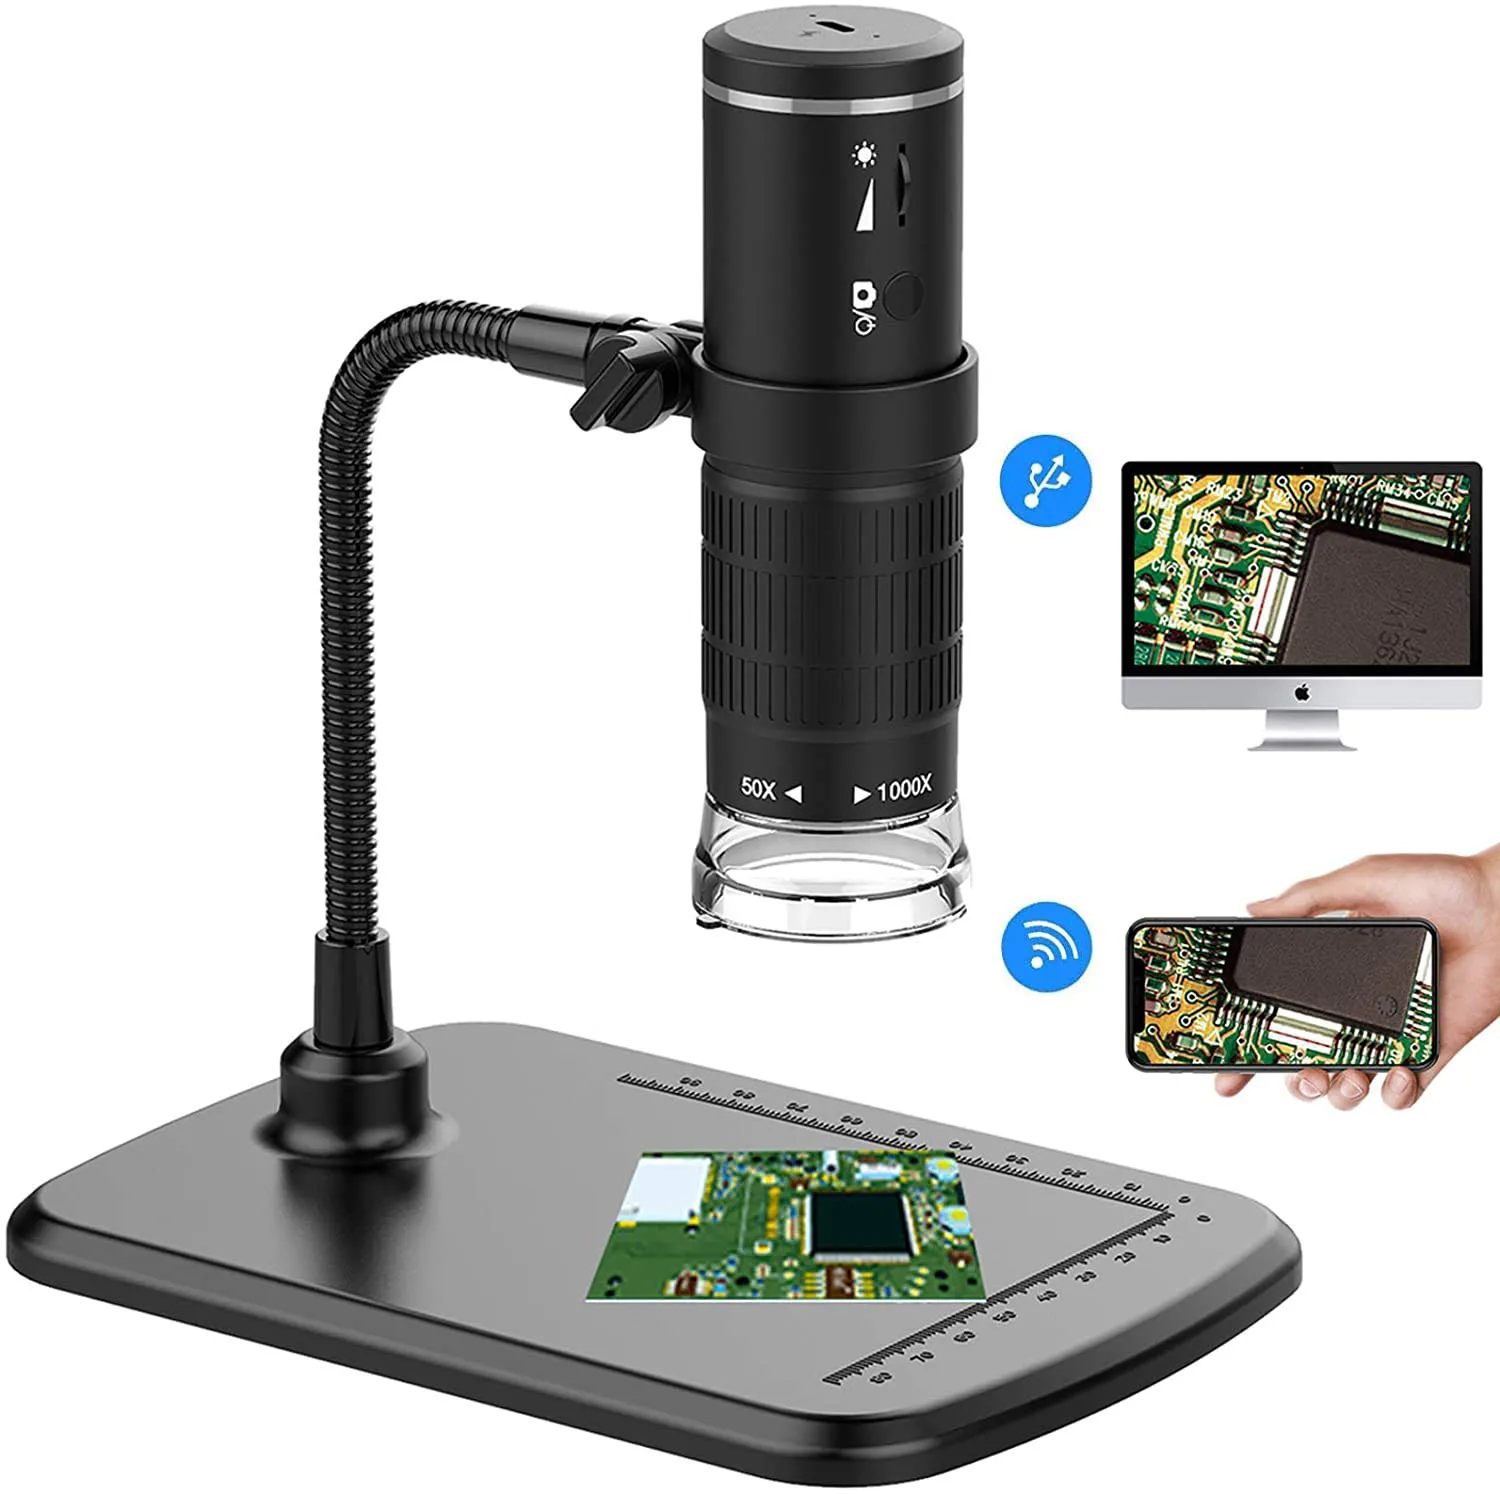 Wireless Digital Microscope Handheld USB HD Inspection Camera 50x-1000x Magnification with Flexible Stand For iPhone iPad PC